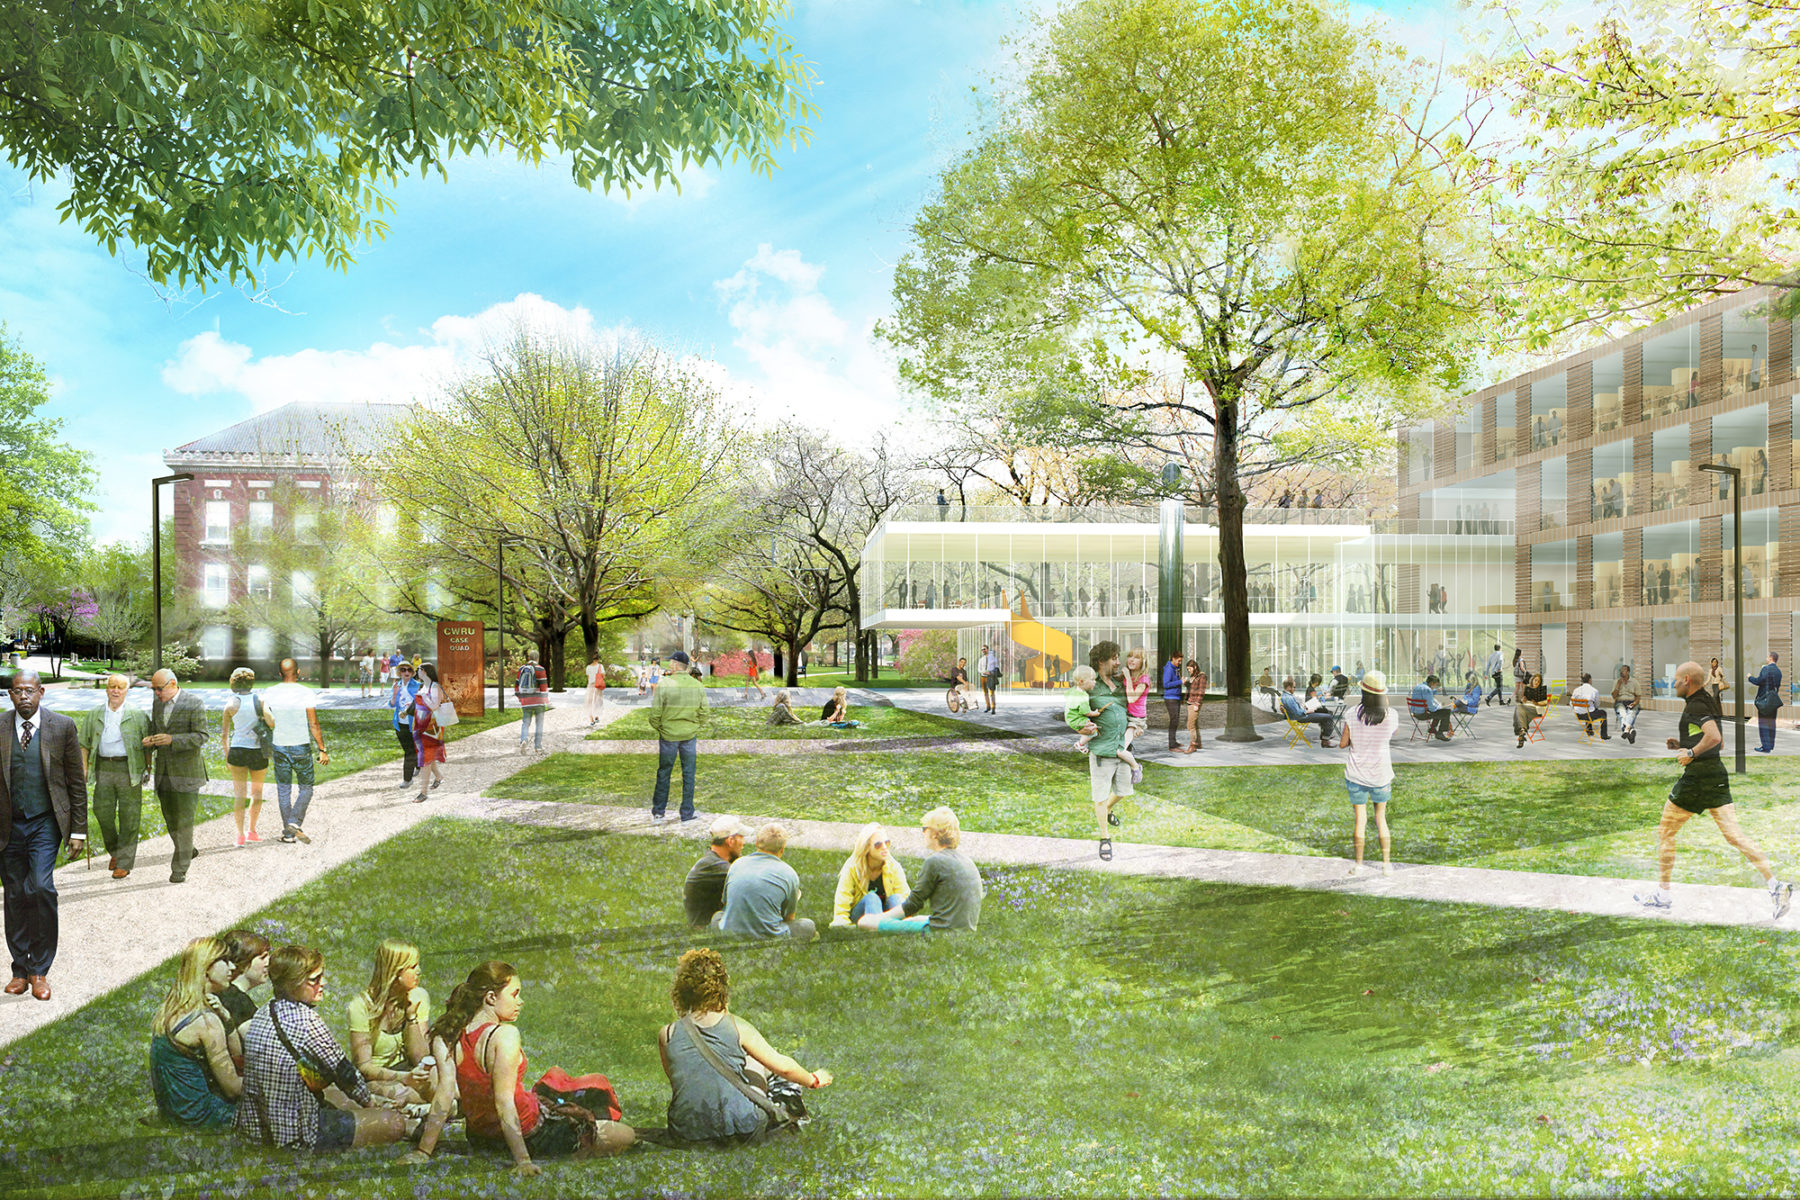 rendering of campus quad with groups of students sitting on the grass